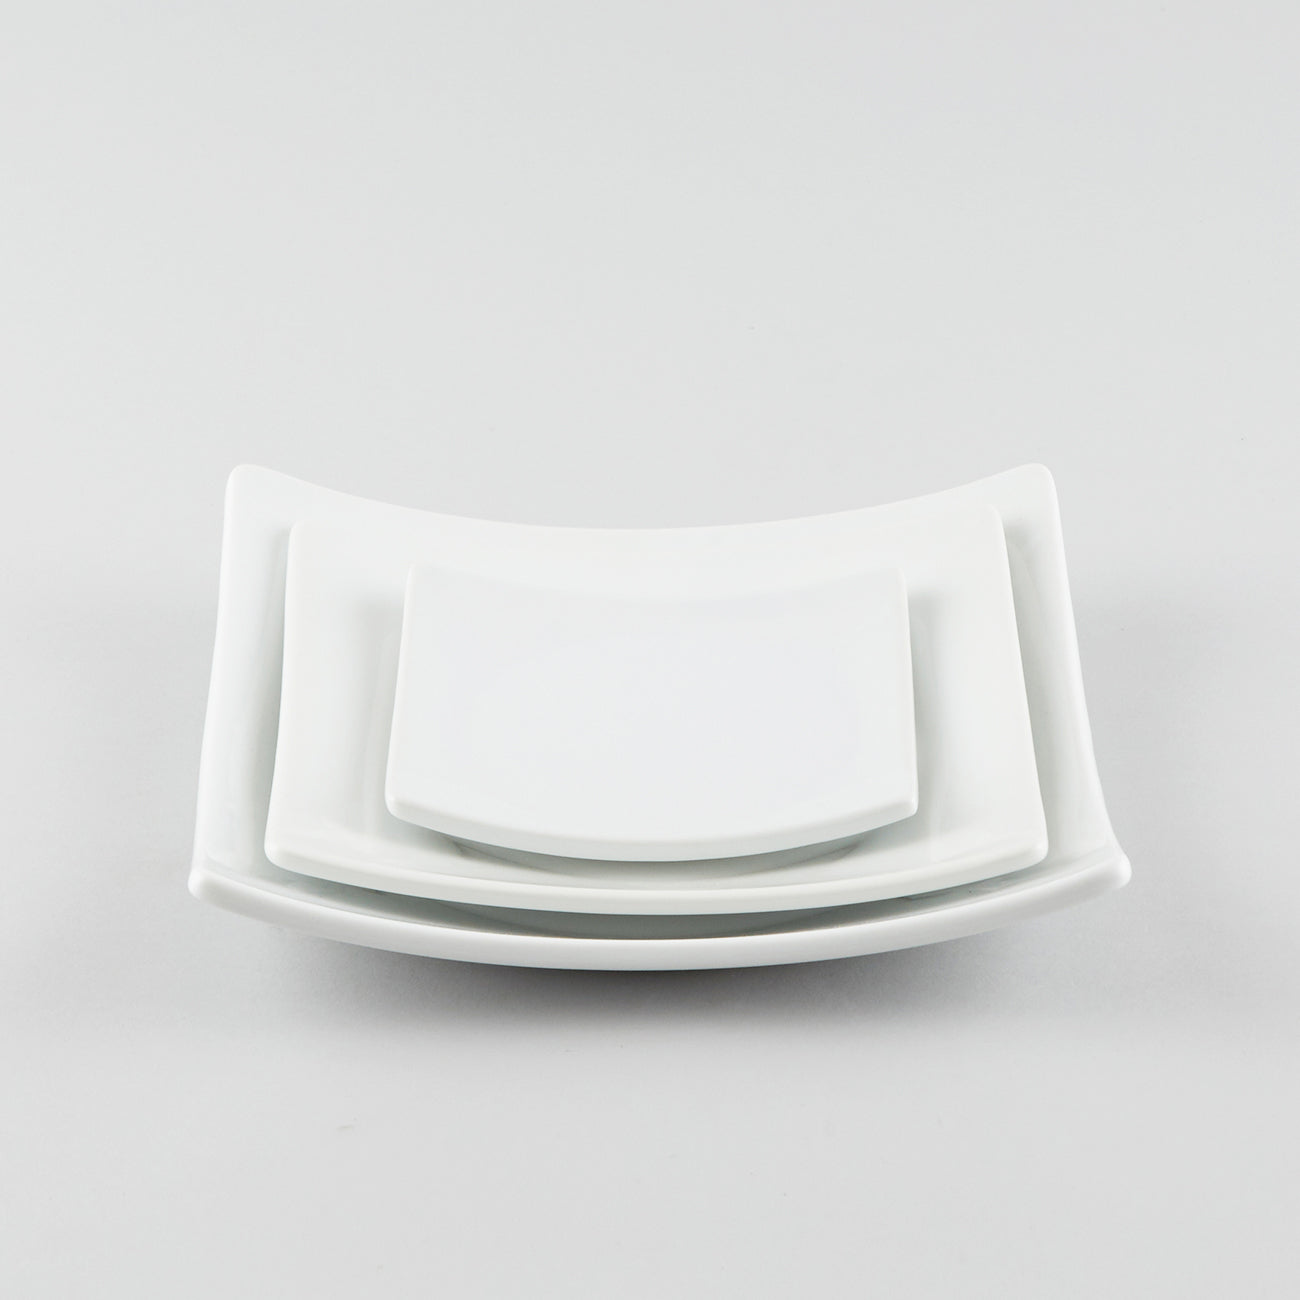 Full-Moon Square Plate with Raised Corners - White (L)